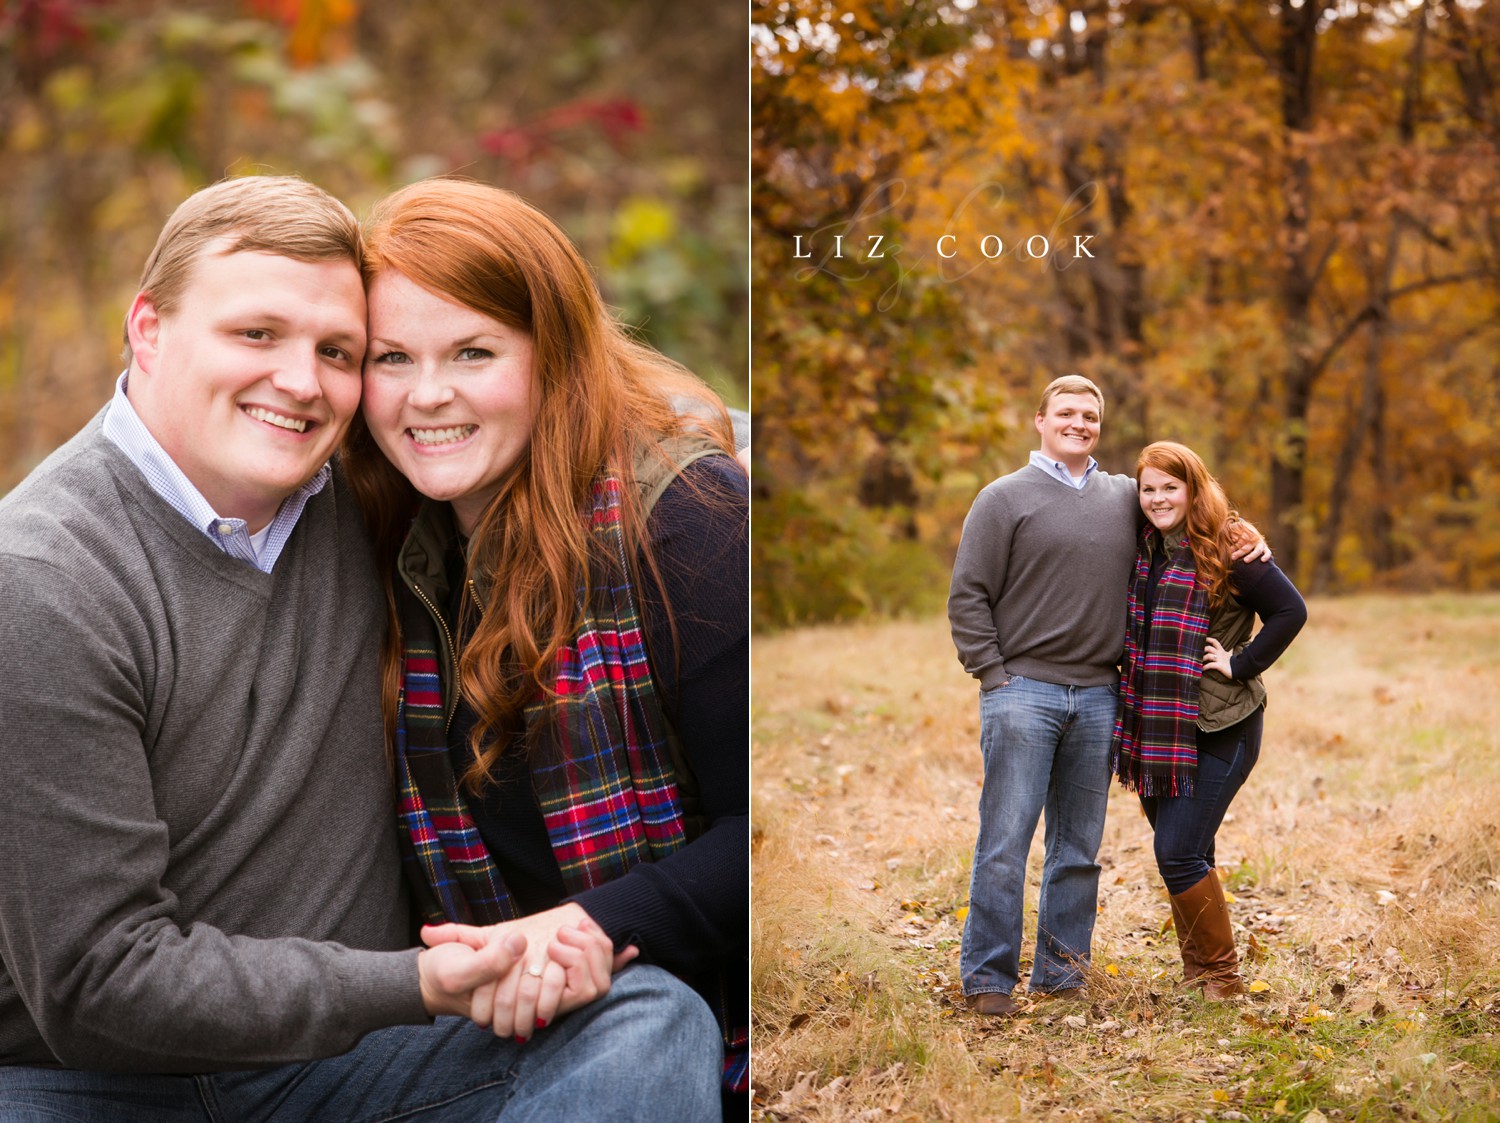 Engagement Portraits on the Blue Ridge Parkway in Central Virginia